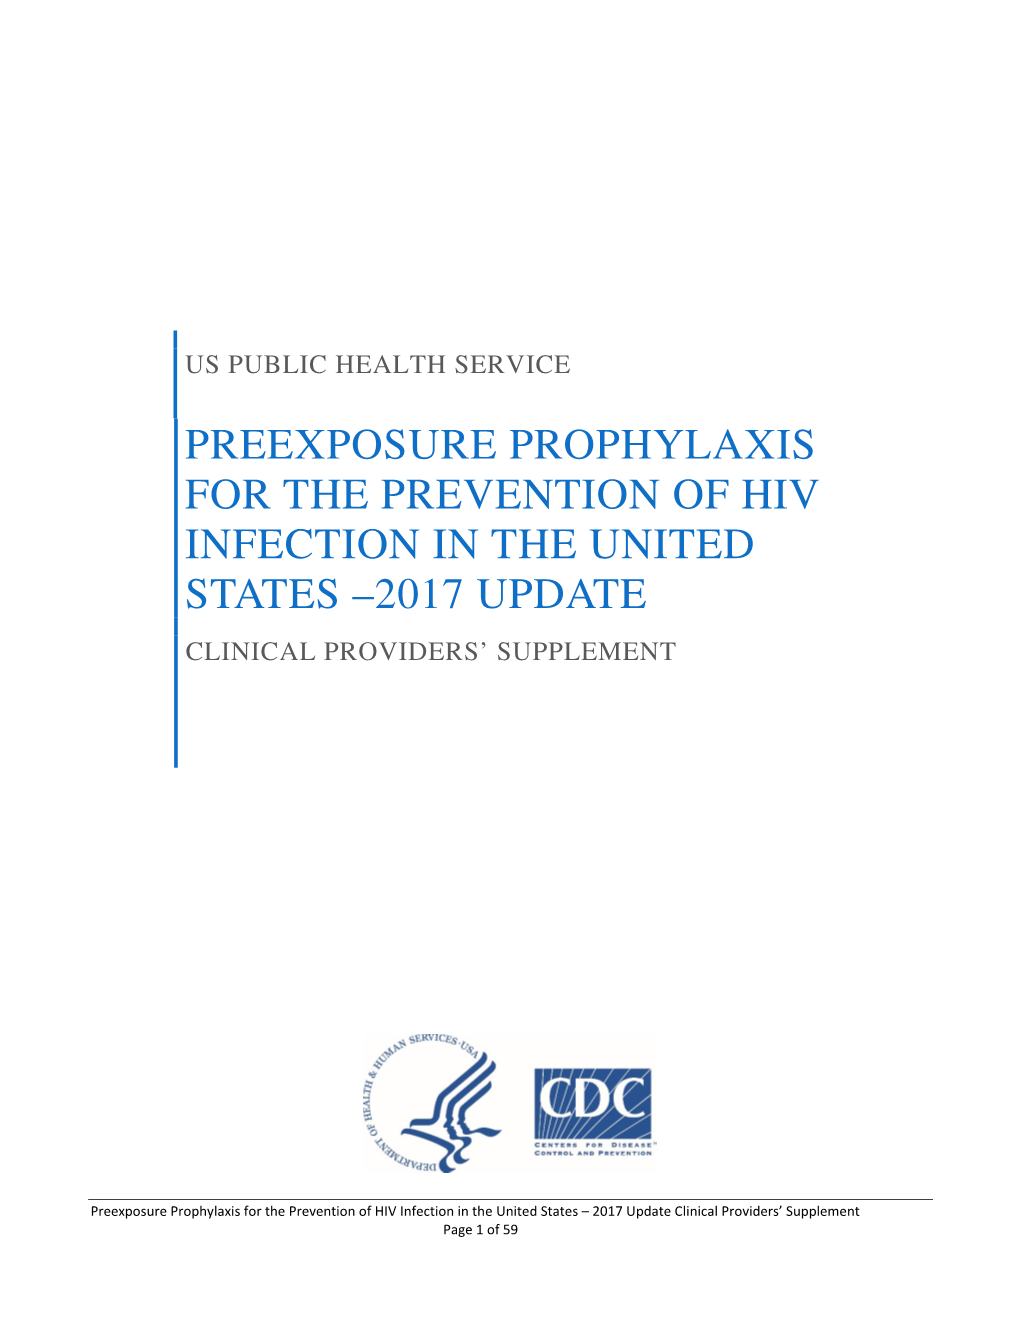 Preexposure Prophylaxis for the Prevention of HIV Infection in the United States – 2017 Update – Clinical Providers’ Supplement? (Published Online March 2018)